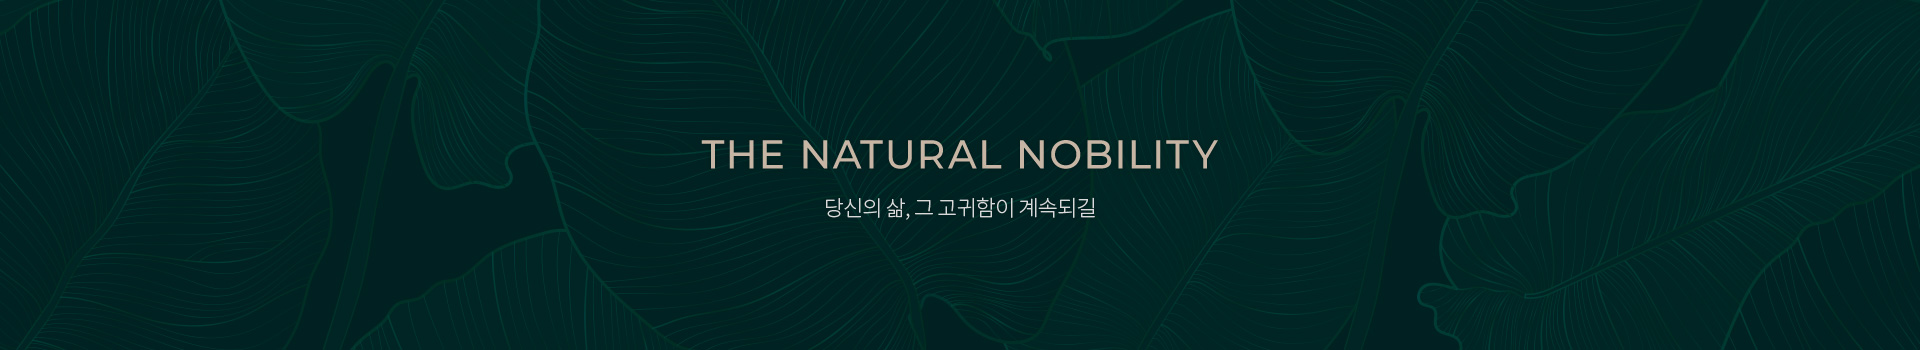 THE NATURAL NOBILITY 본연이 지니는 고귀함